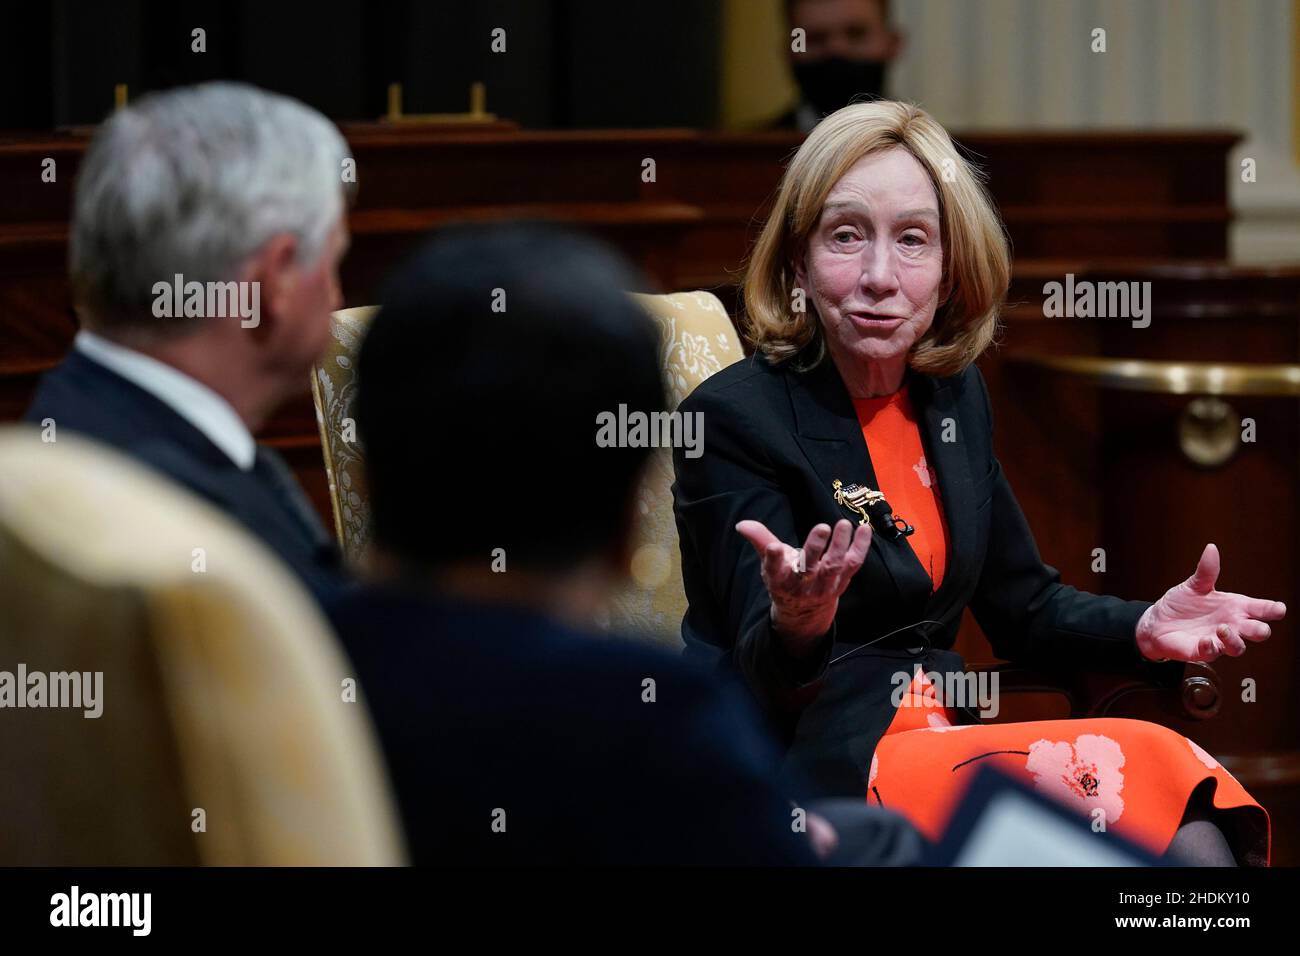 Historian Doris Kearns Goodwin, right, speaks as historian Jon Meacham, left, listens during an event on Capitol Hill in Washington, Thursday, Jan. 6, on how to establish and preserve the narrative of January 6th. The event marked the first anniversary of the U.S. Capitol insurrection, the violent attack by Trump supporters that has fundamentally changed the Congress and raised global concerns about the future of American democracy. Credit: Susan Walsh/Pool via CNP Stock Photo